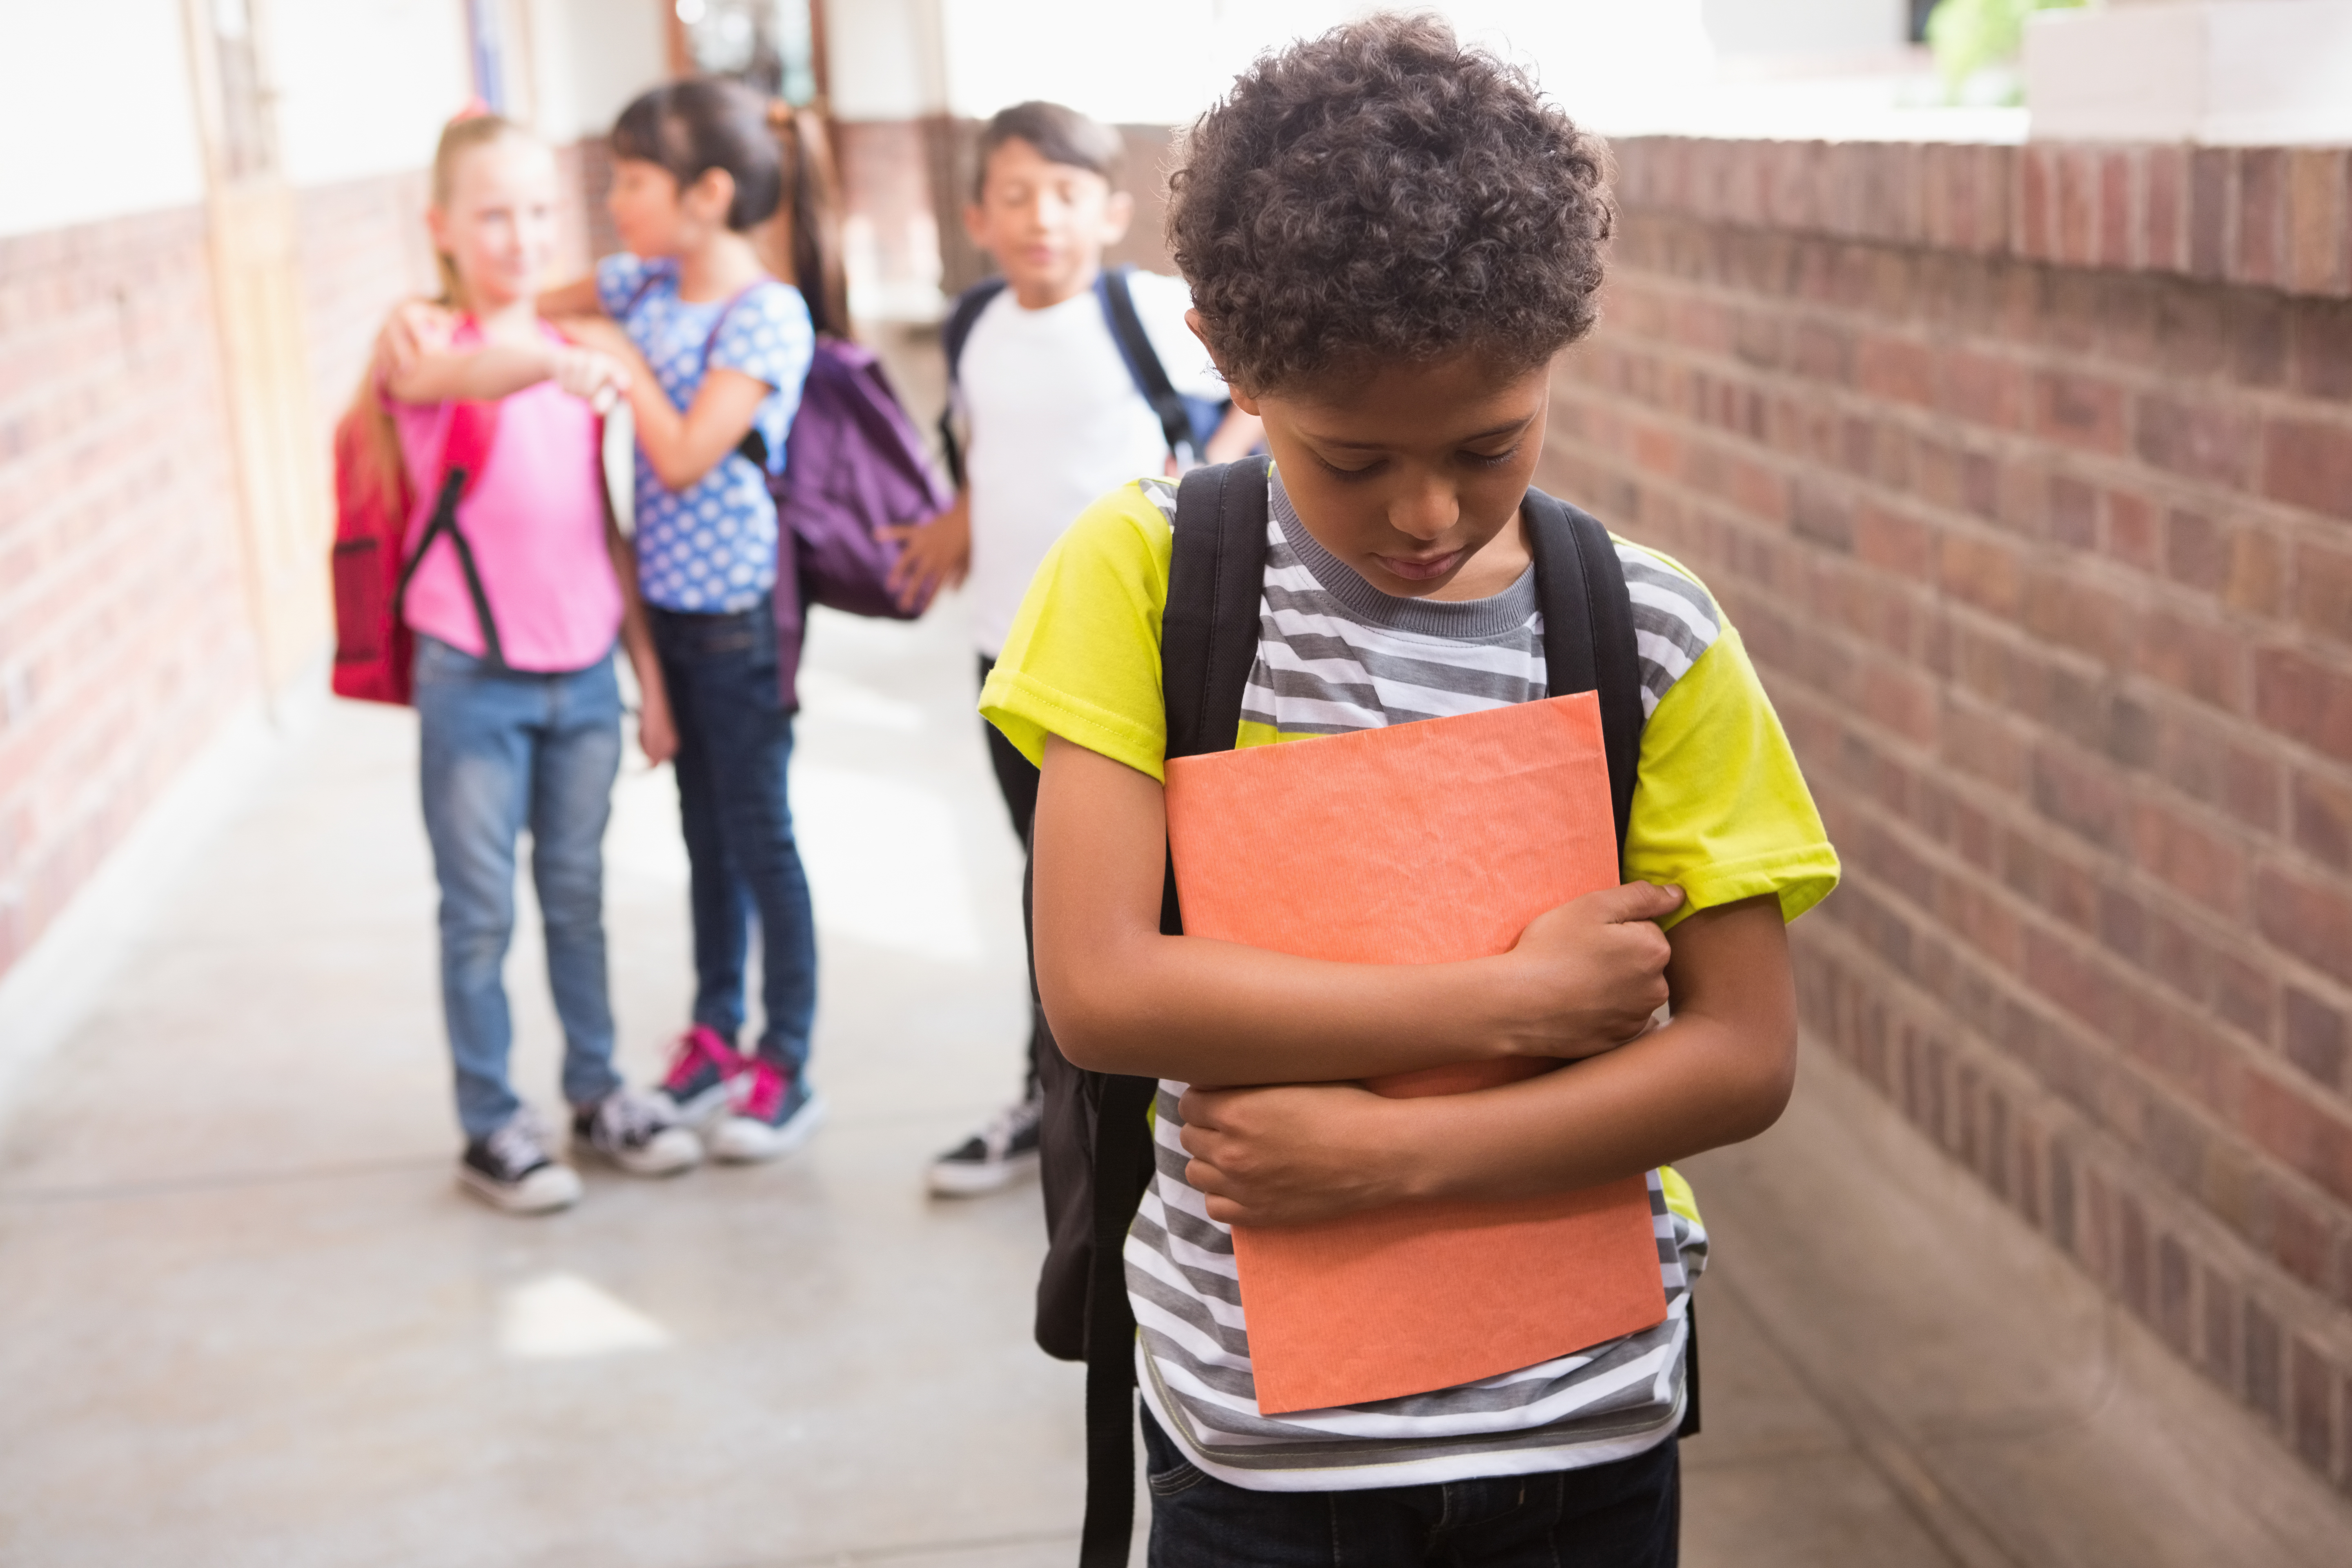 Your child might be a bully. Here are 7 ways to stop that behavior.